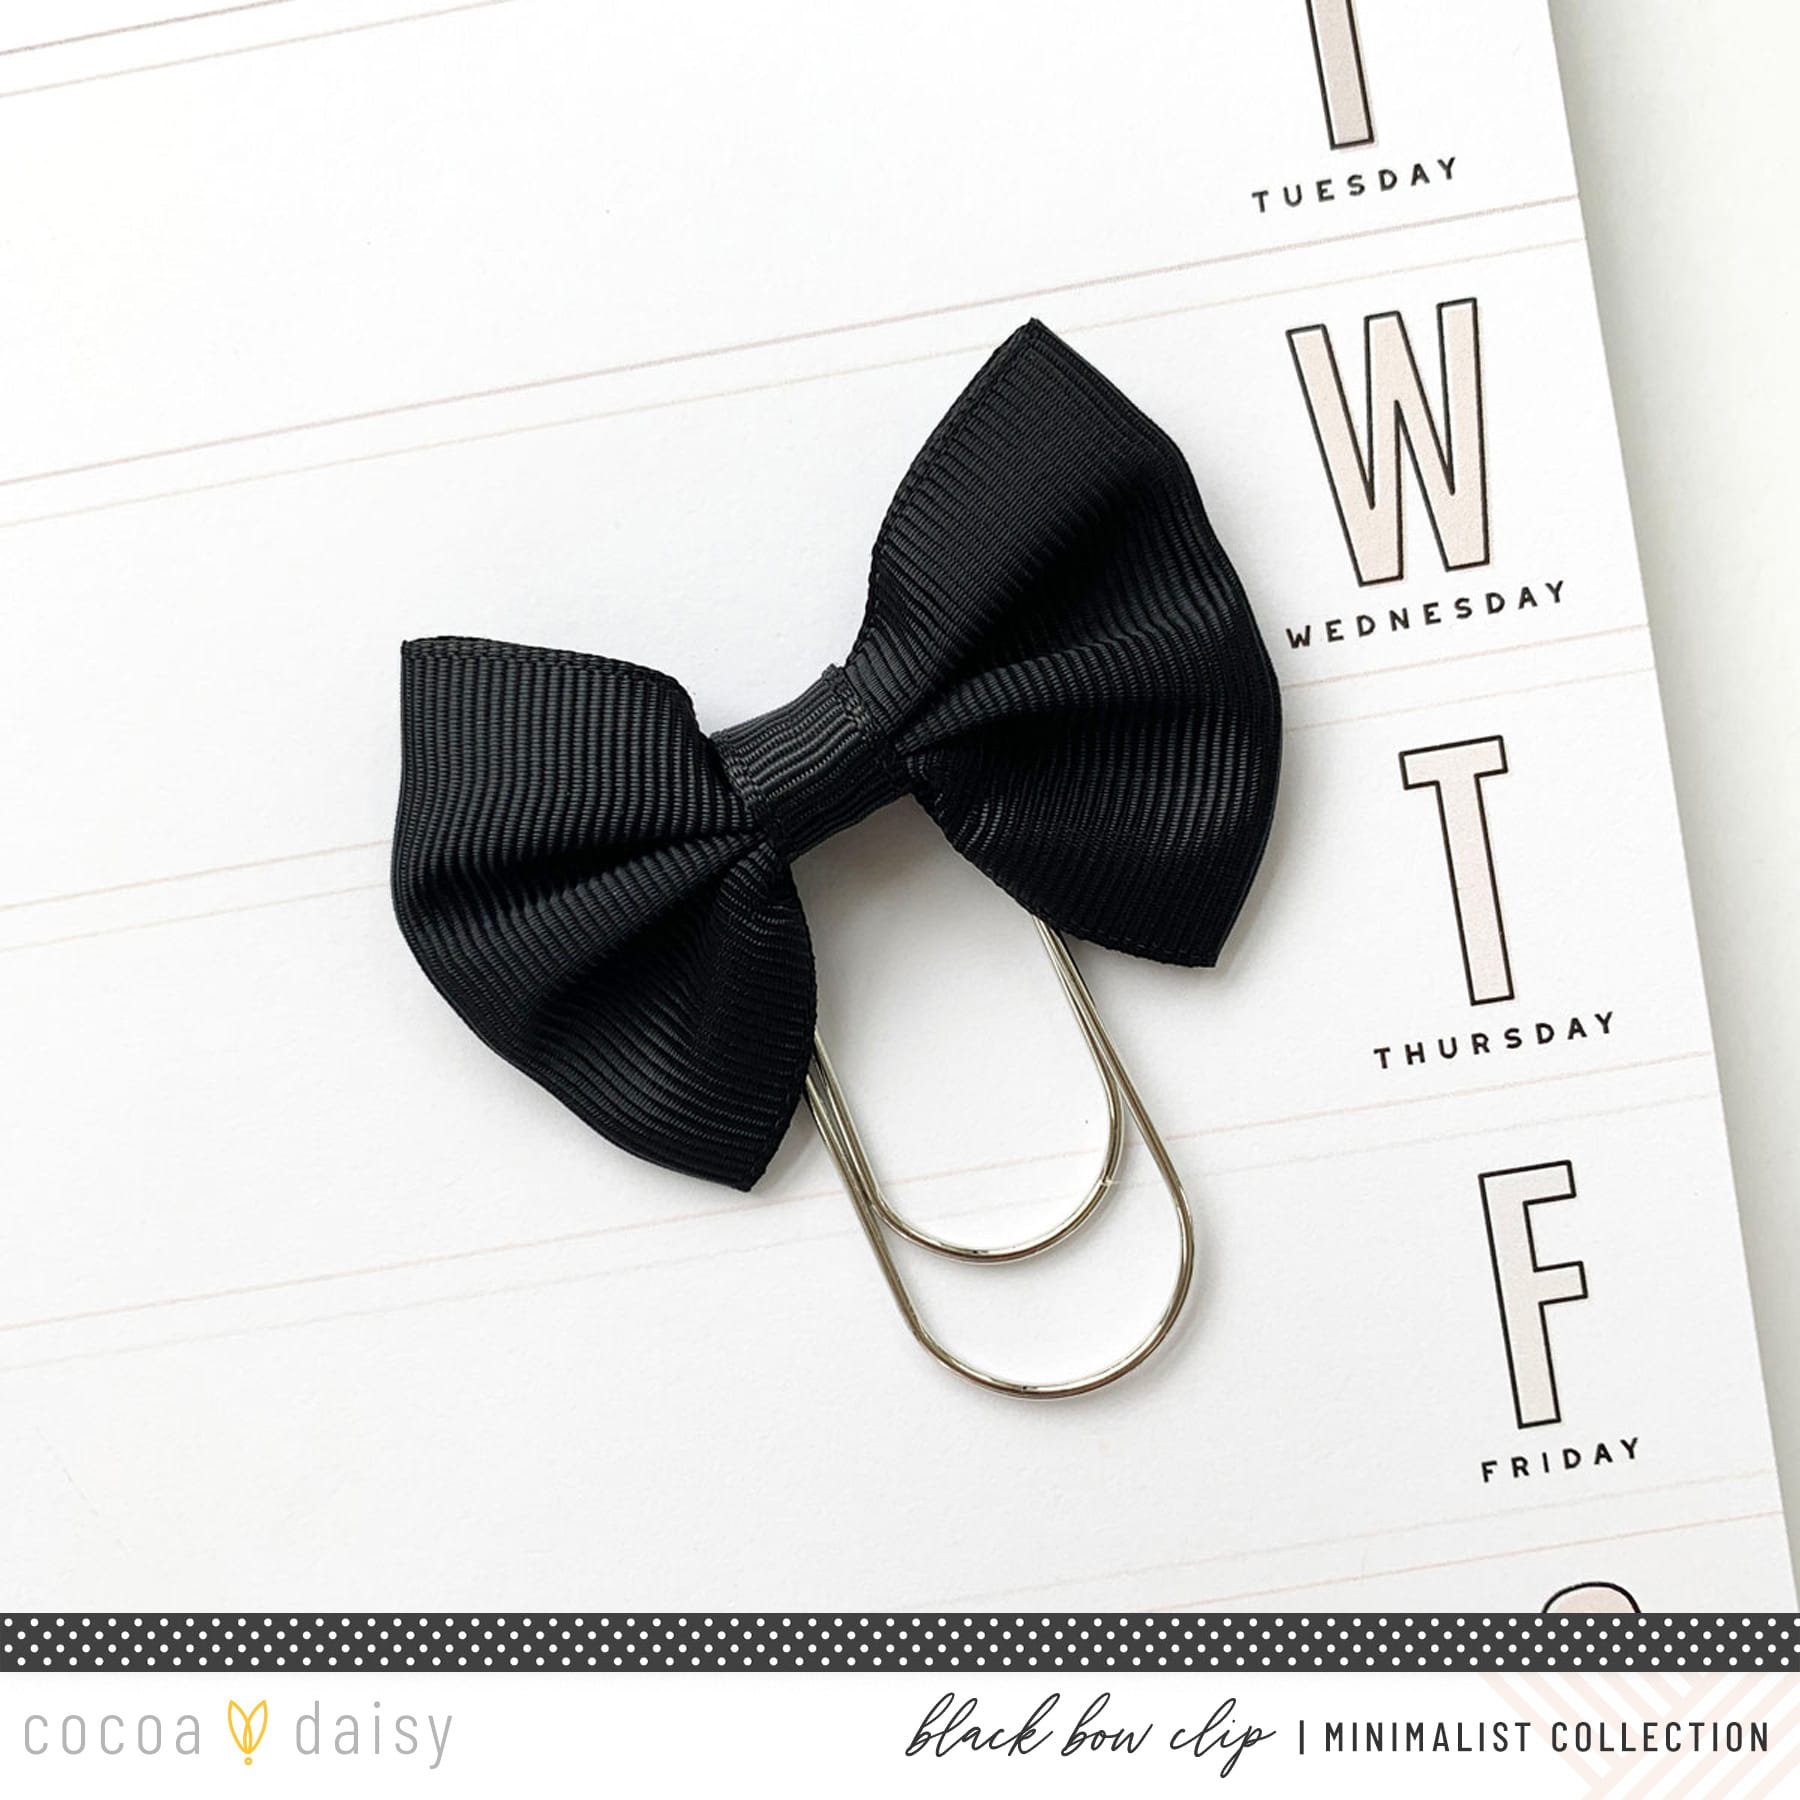 The Minimalist Collection Black Bow Clip